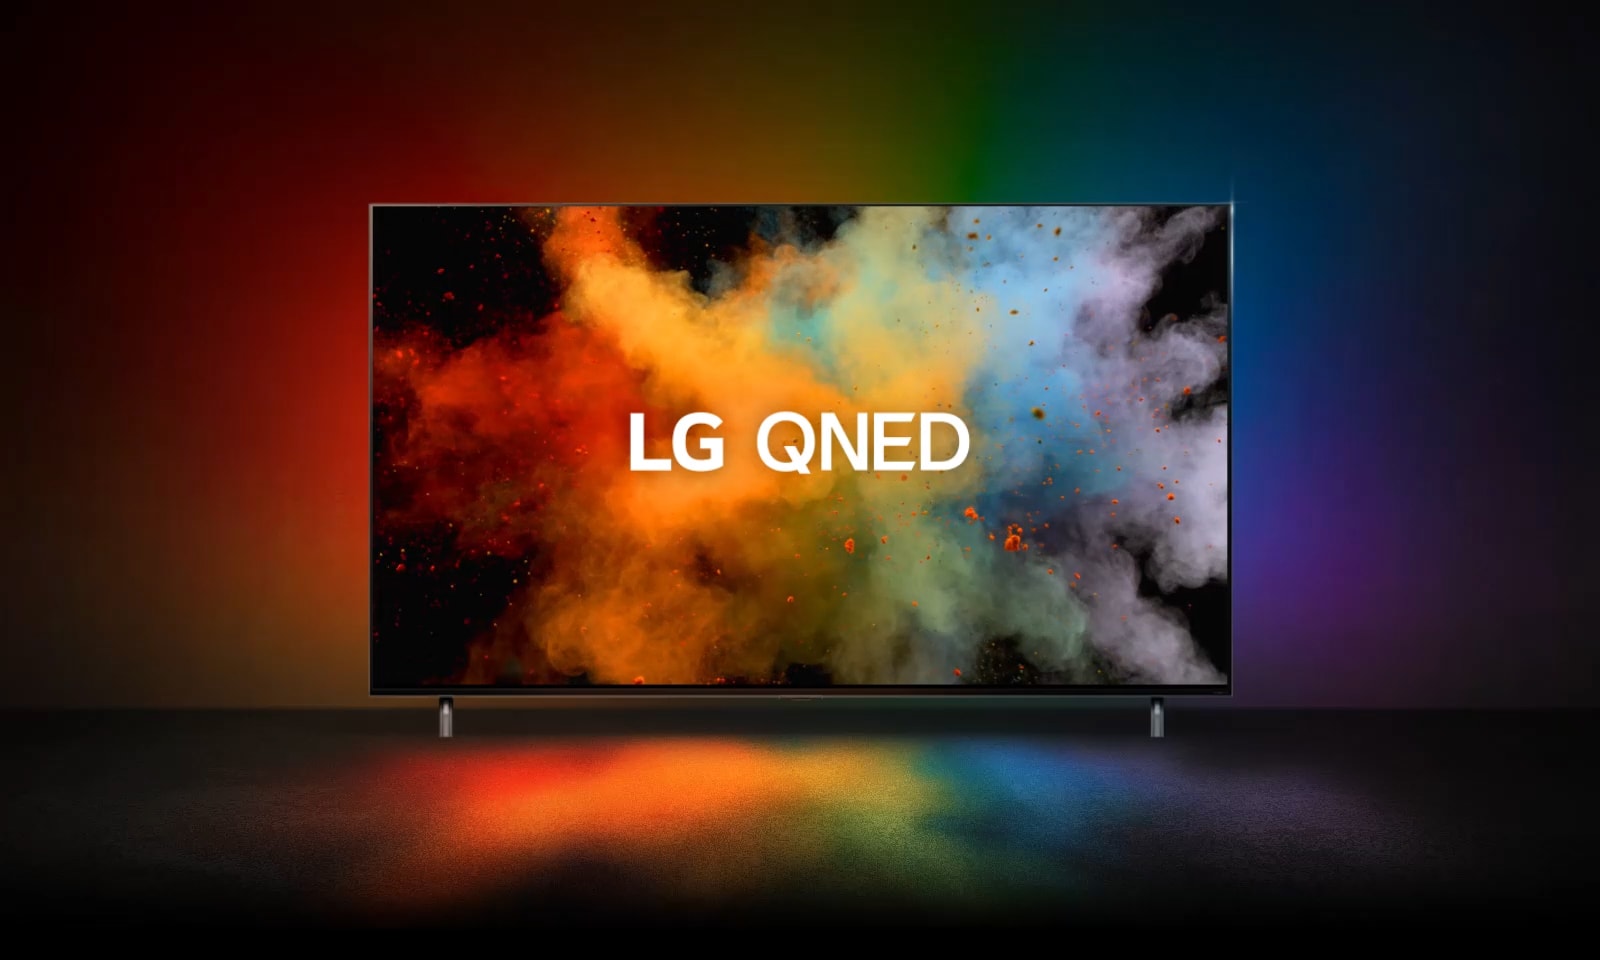 Typo-motion of QNED and NanoCell overlap and explode into color powder. LG QNED miniLED logo appears on TV. 